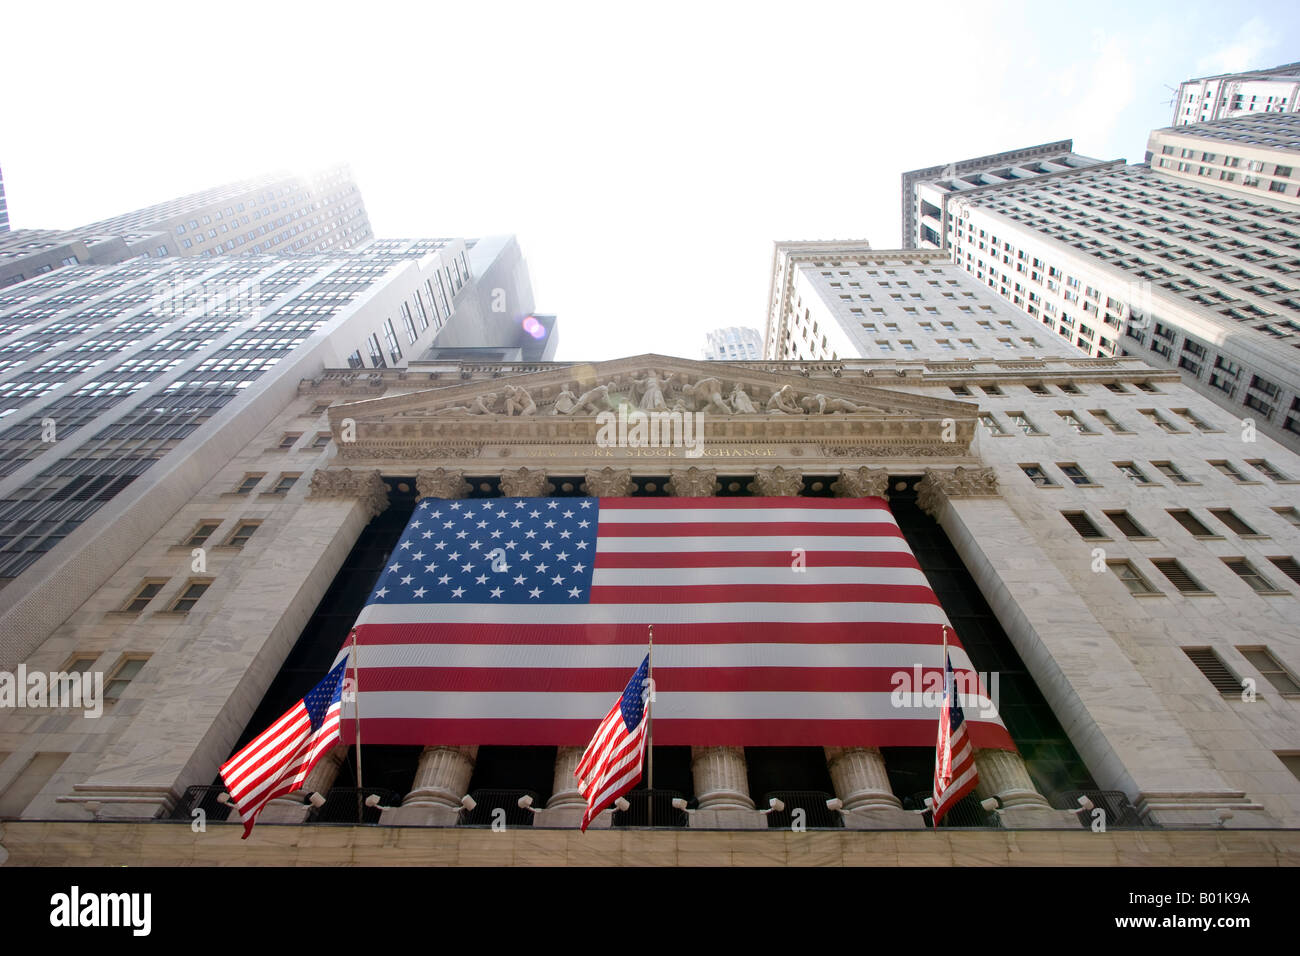 Der New York Stock Exchange (NYSE) an Wall Street, New York, New York, 15. August 2006. Stockfoto